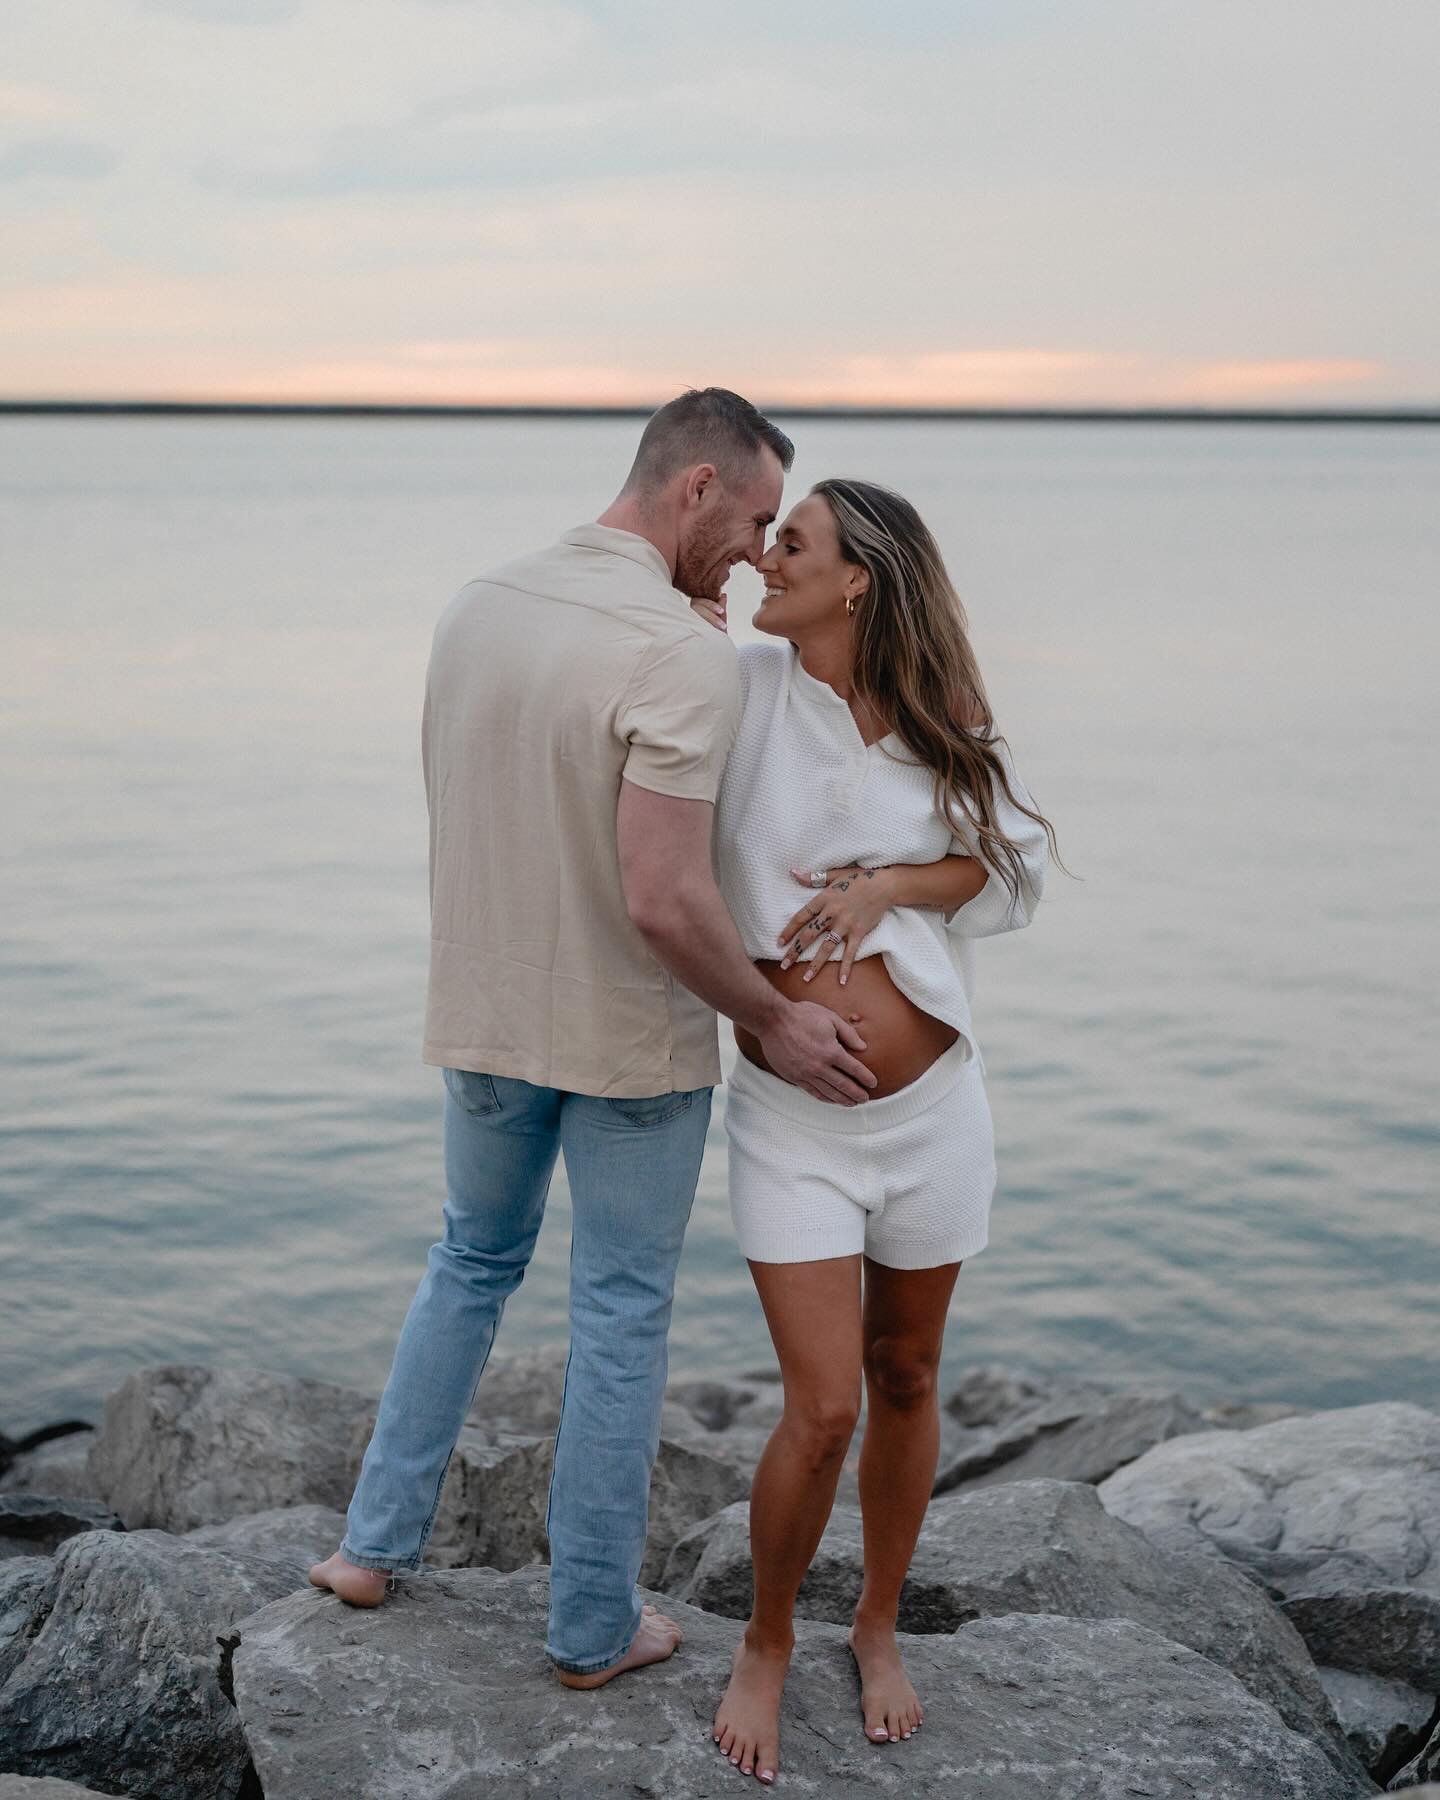 maternity sessions + sunsets&hellip;2 of my favvvvorite things. 

shot with @kaitlynfrankphoto 🕊️

#lillianfarrellphotography #maternityphotography #buffalophotographer #sunsetsessions #maternity